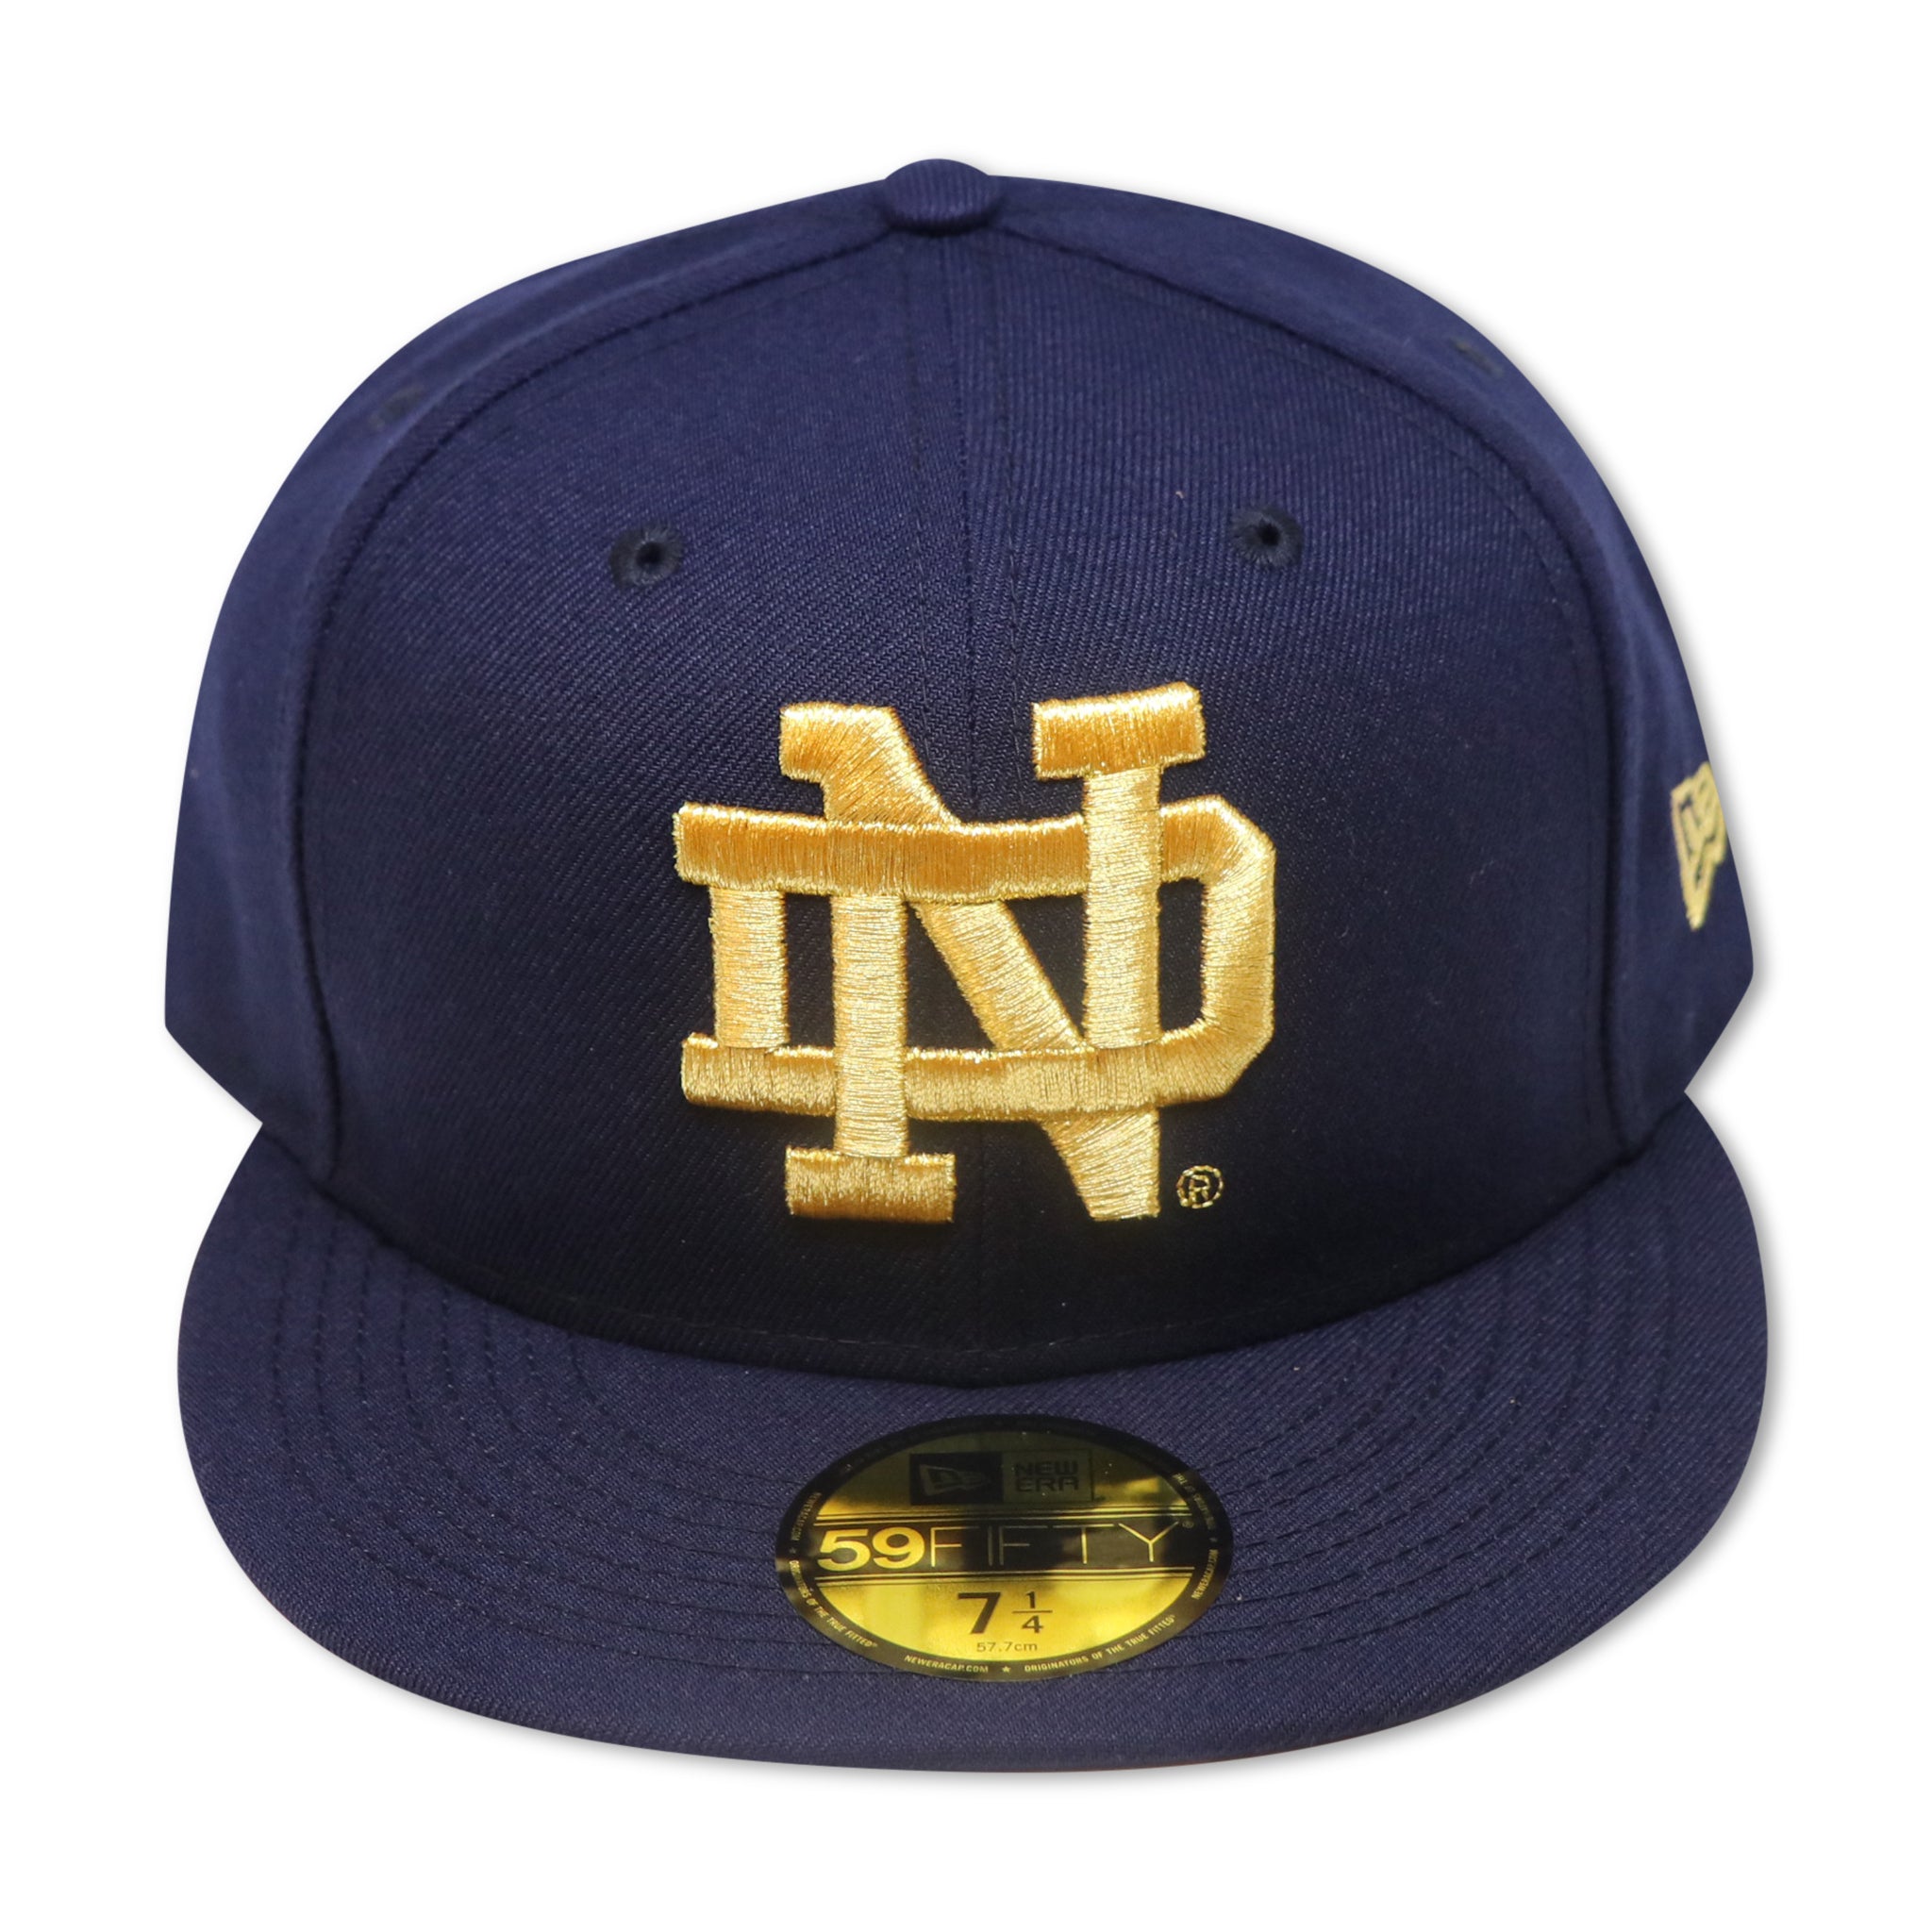 NOTRE DAME FIGHTING IRISH NEW ERA 59FIFTY FITTED